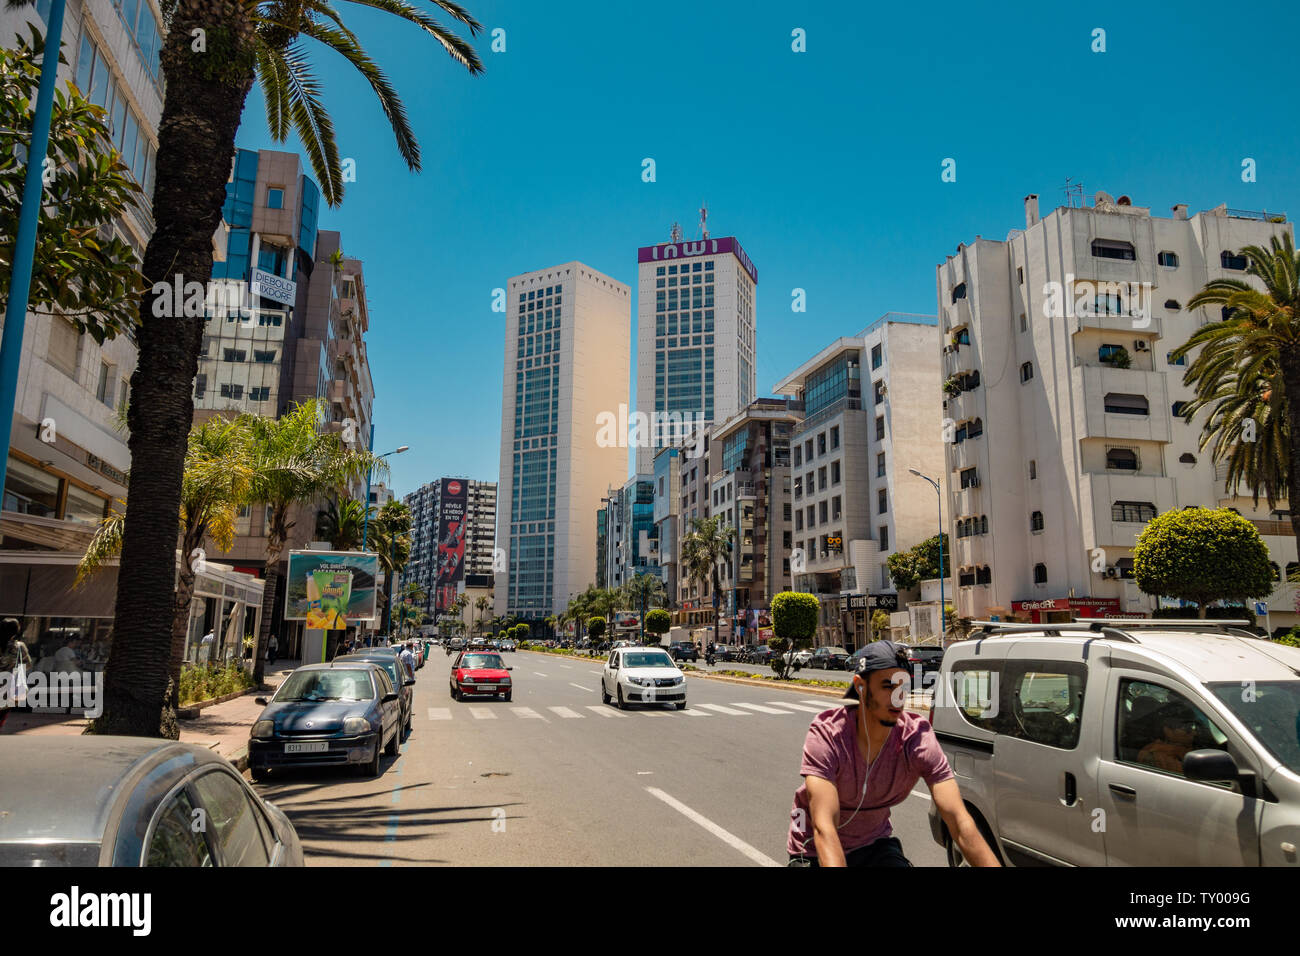 Casablanca, Morocco - 15 june 2019: cars trucks and taxis in the middle of a traffic jam Stock Photo